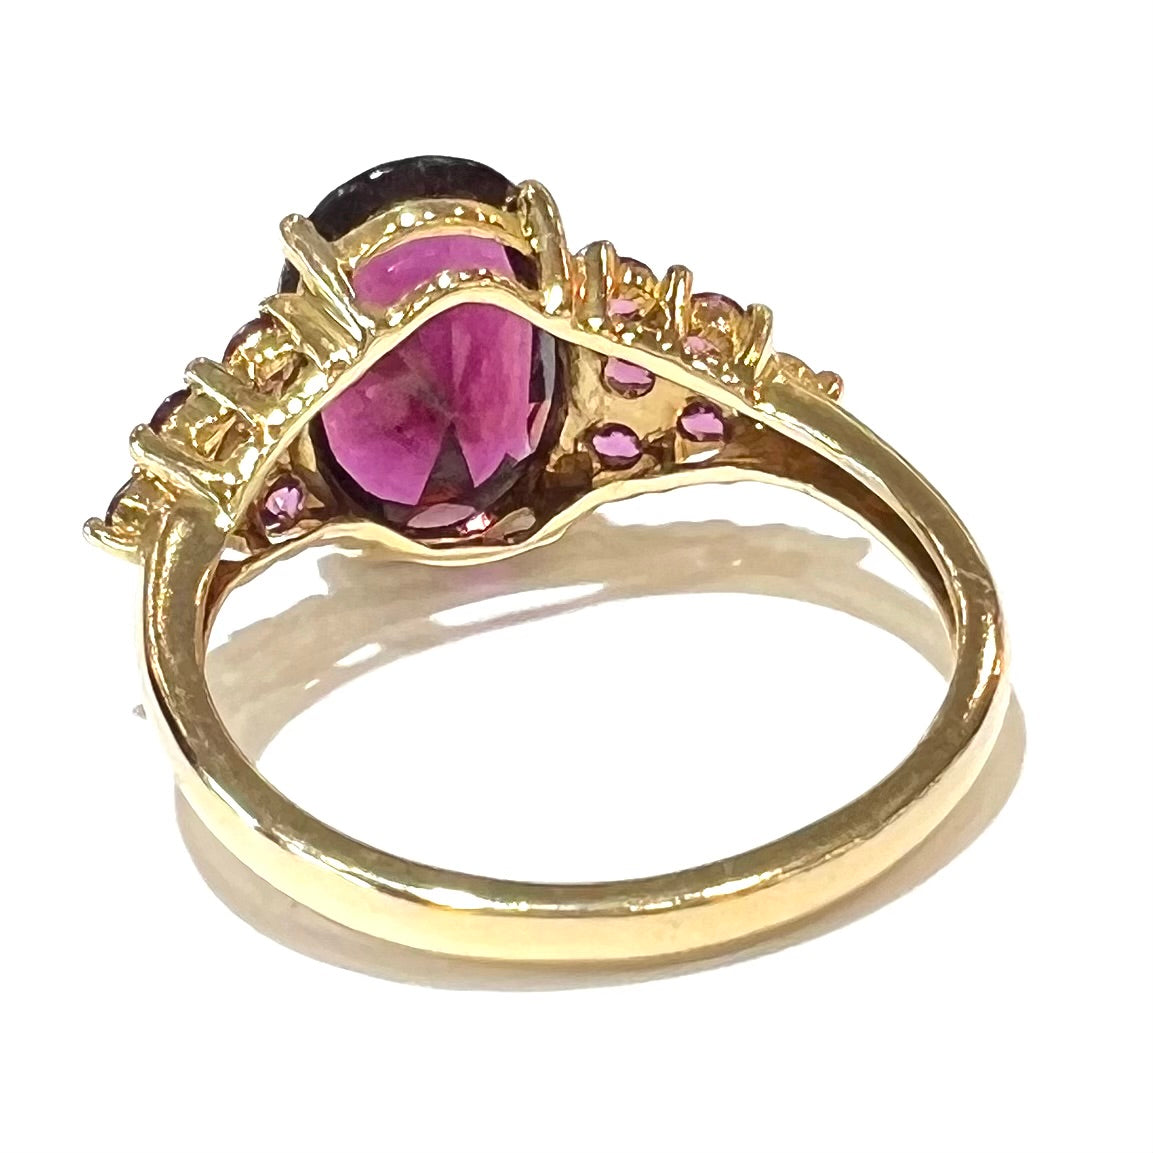 A yellow gold ring set with clusters of purple garnets set on each side of a rhodolite garnet.